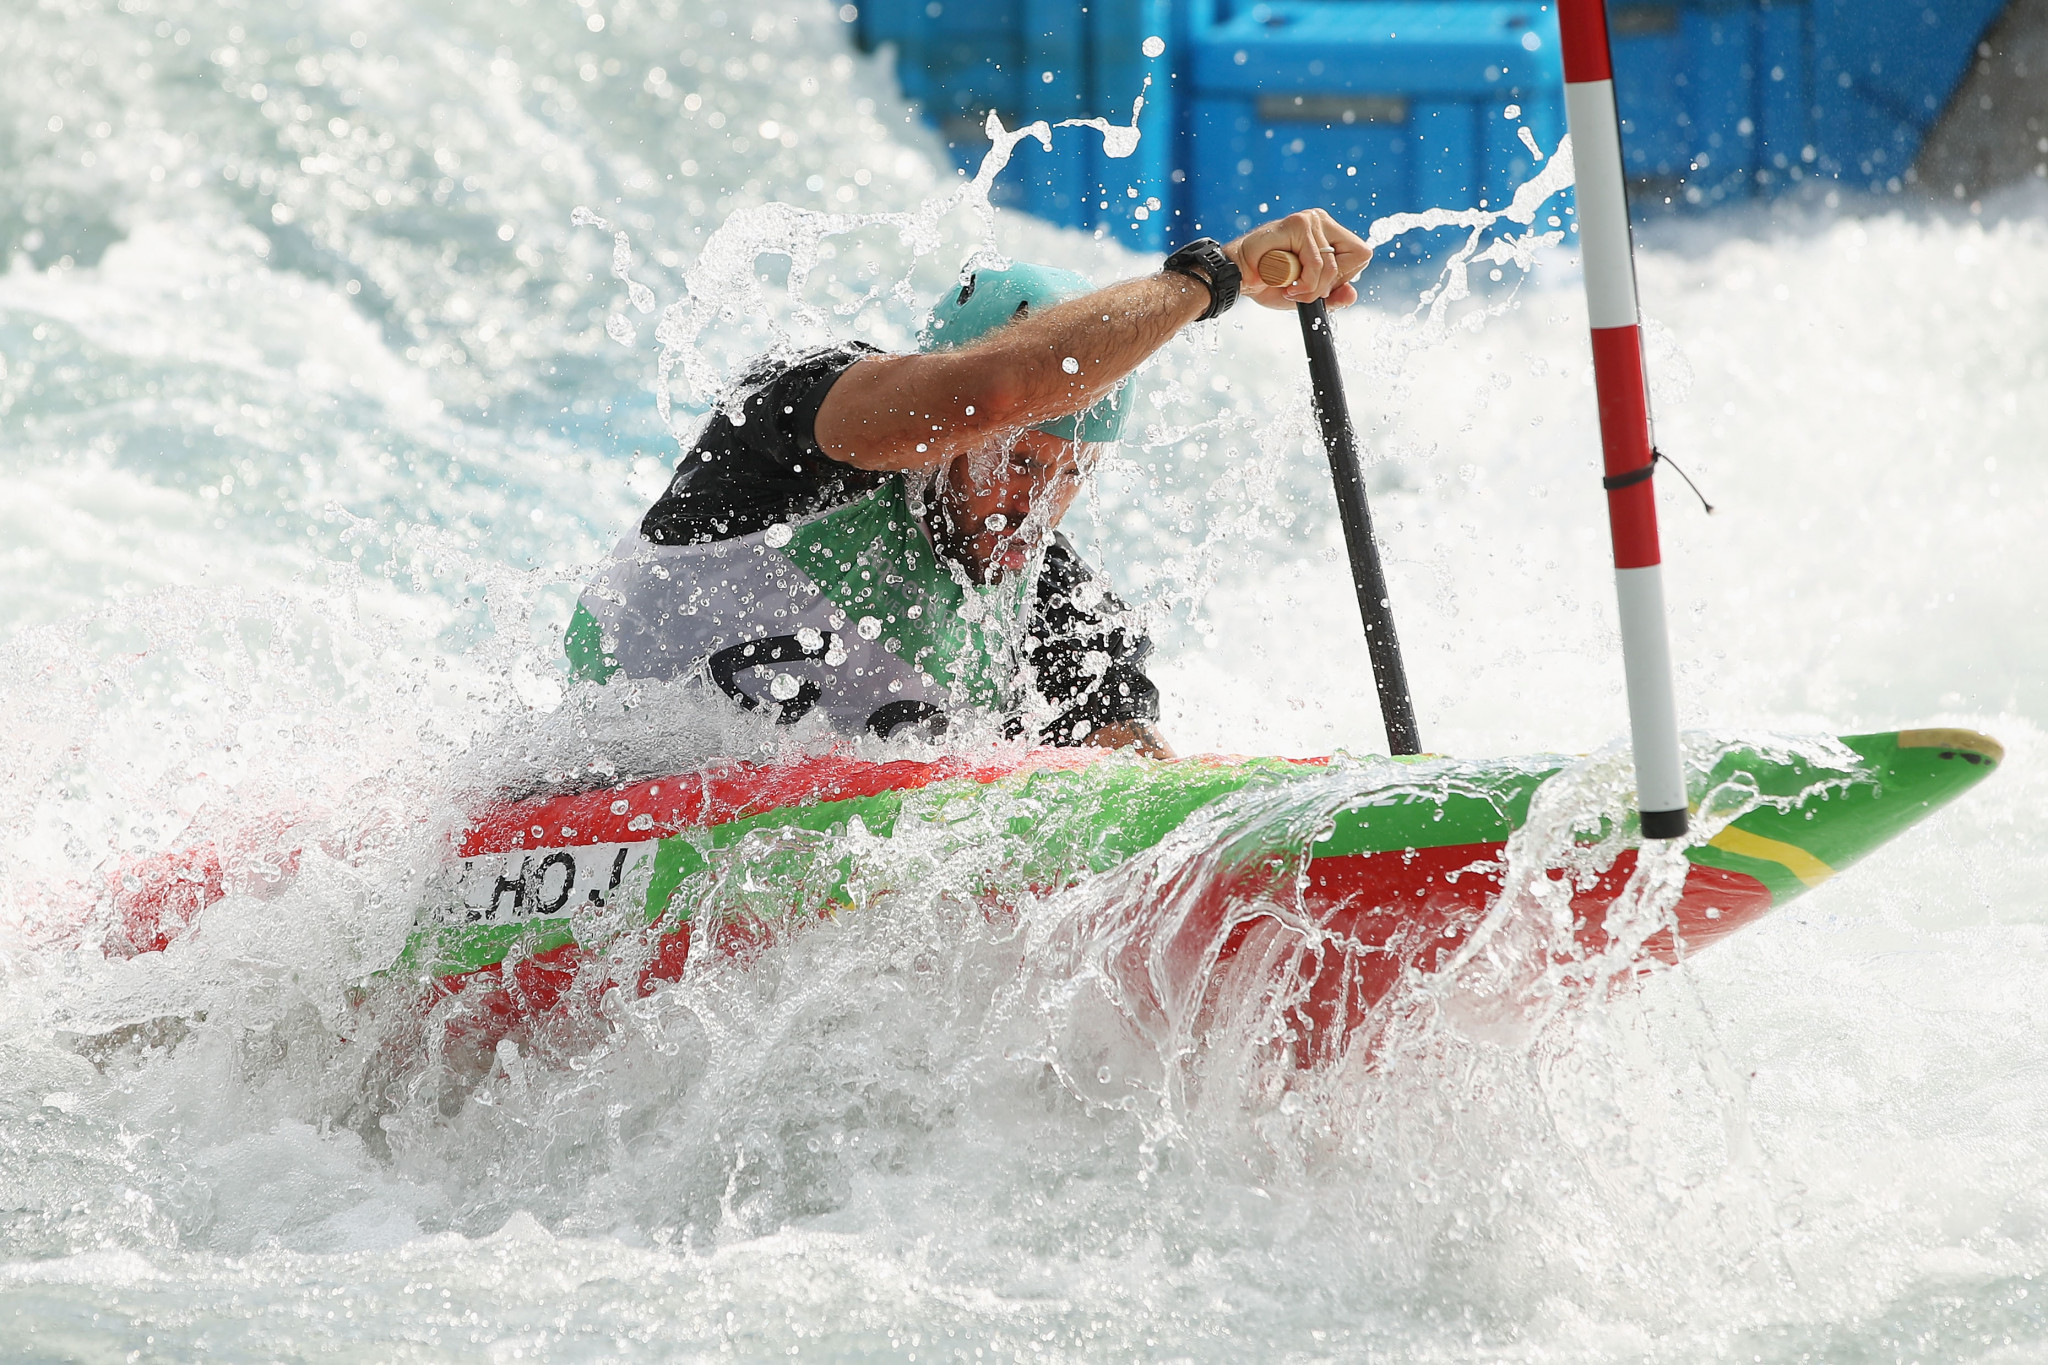 The International Canoe Federation has allocated quota spots for Tokyo 2020 ©Getty Images